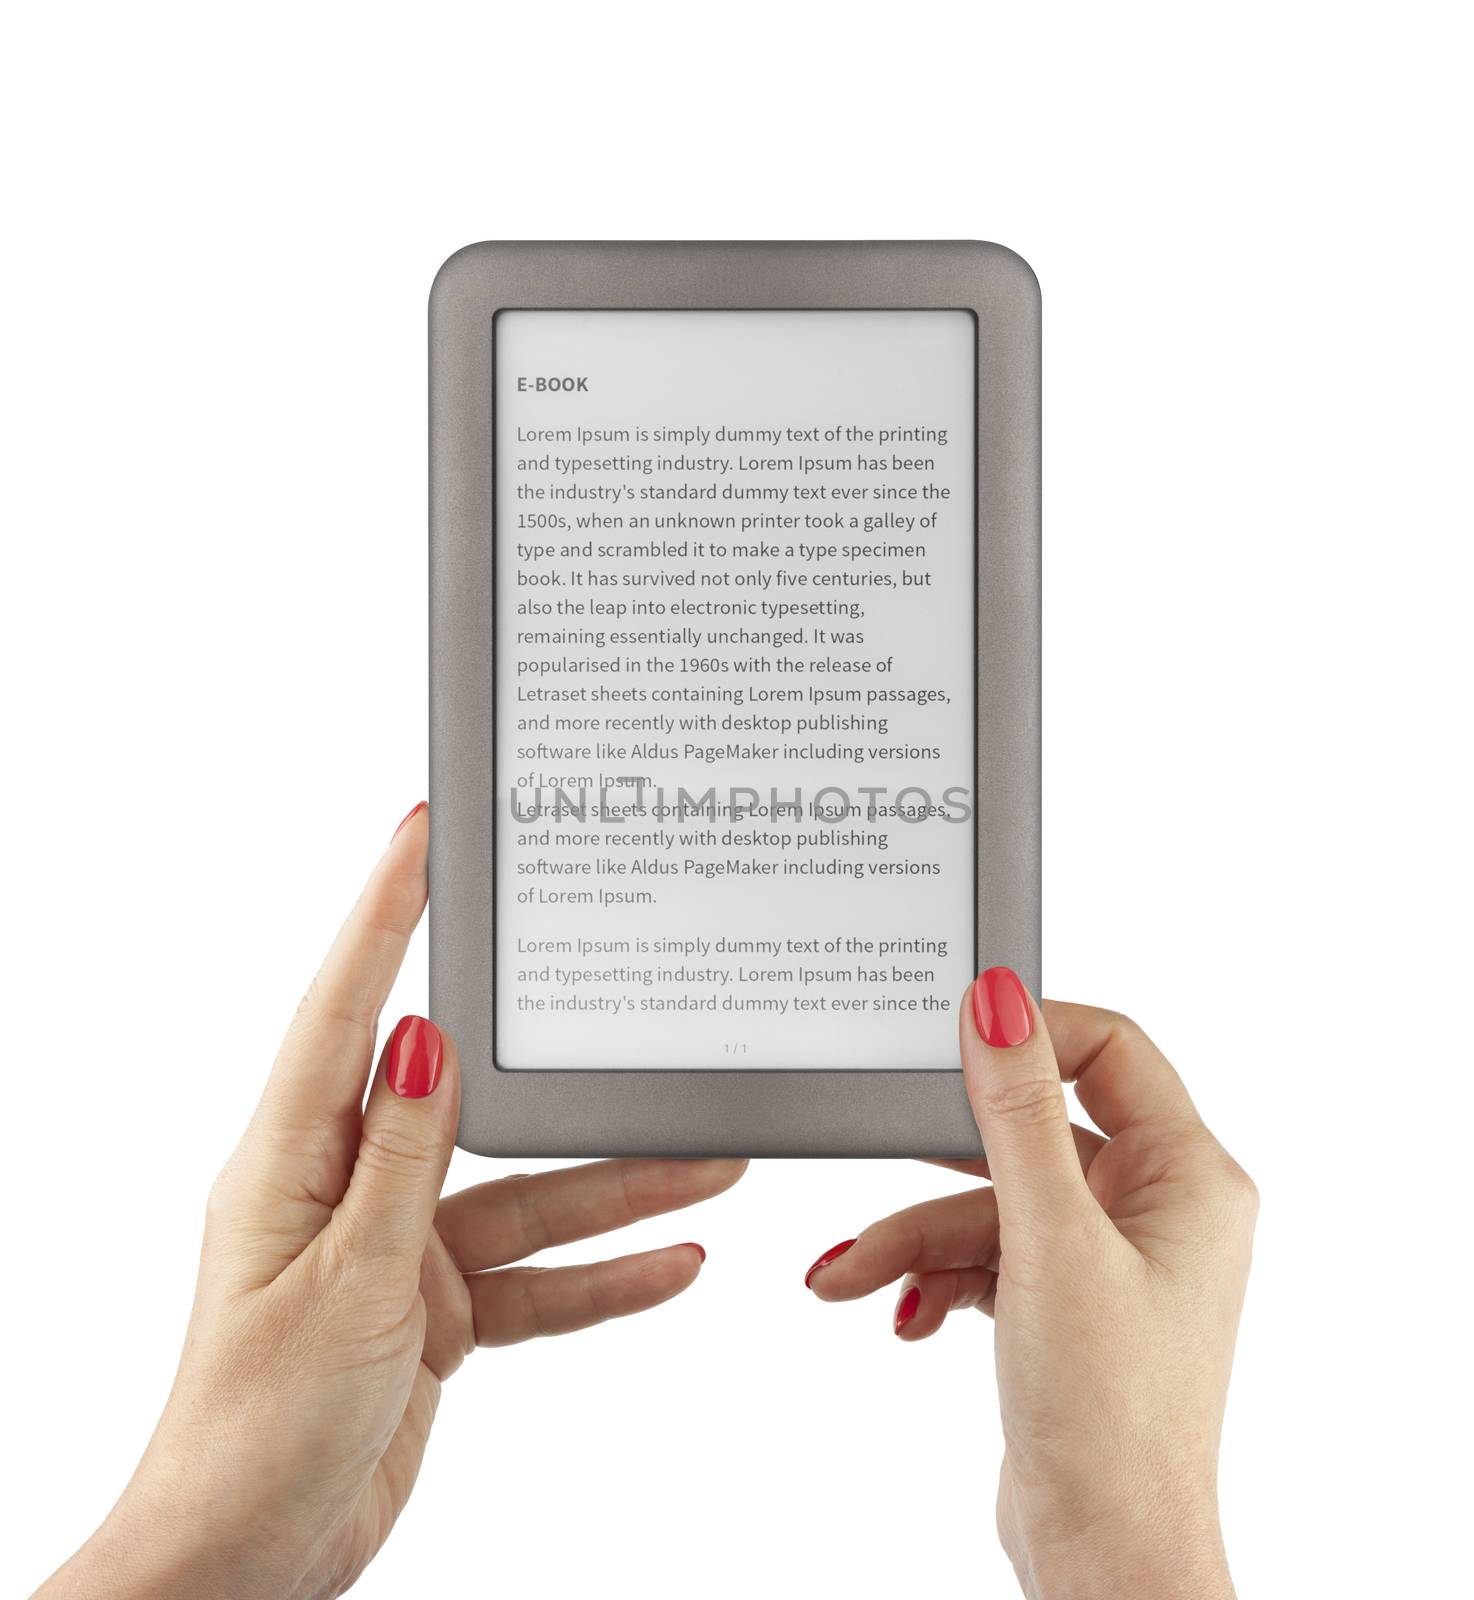 Holding E-book reader in hands by SlayCer